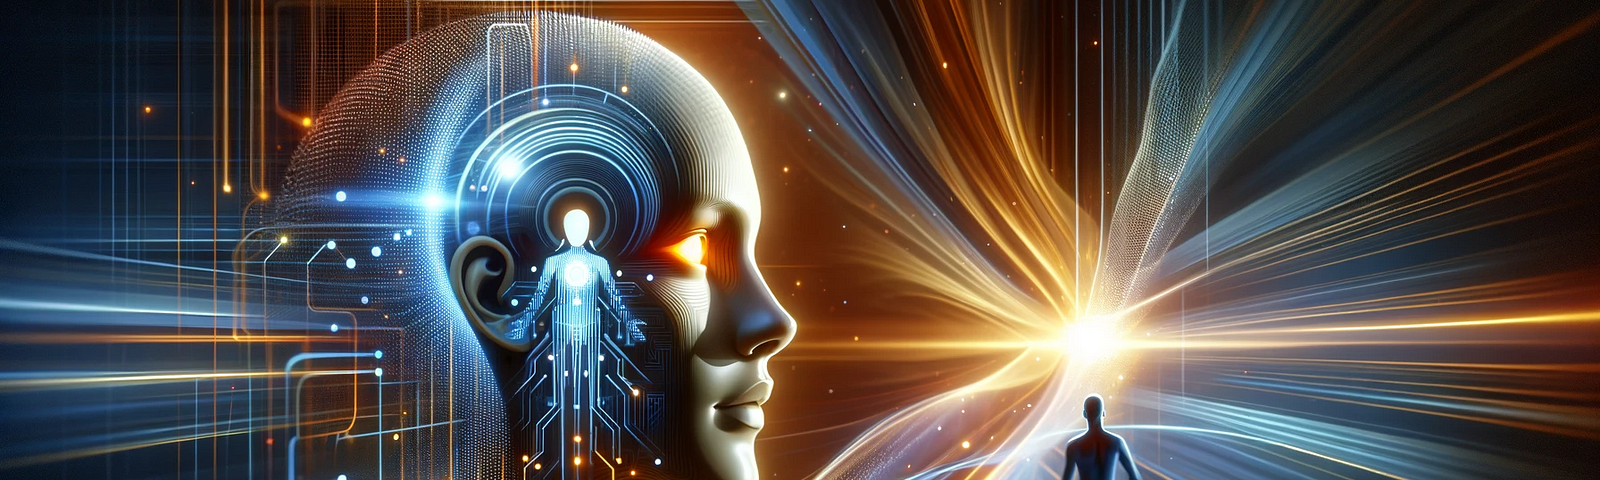 Futuristic image of a humanoid AI with a digital face displaying intelligence and charisma, persuading a human against a backdrop of digital waves and a sleek, modern environment.